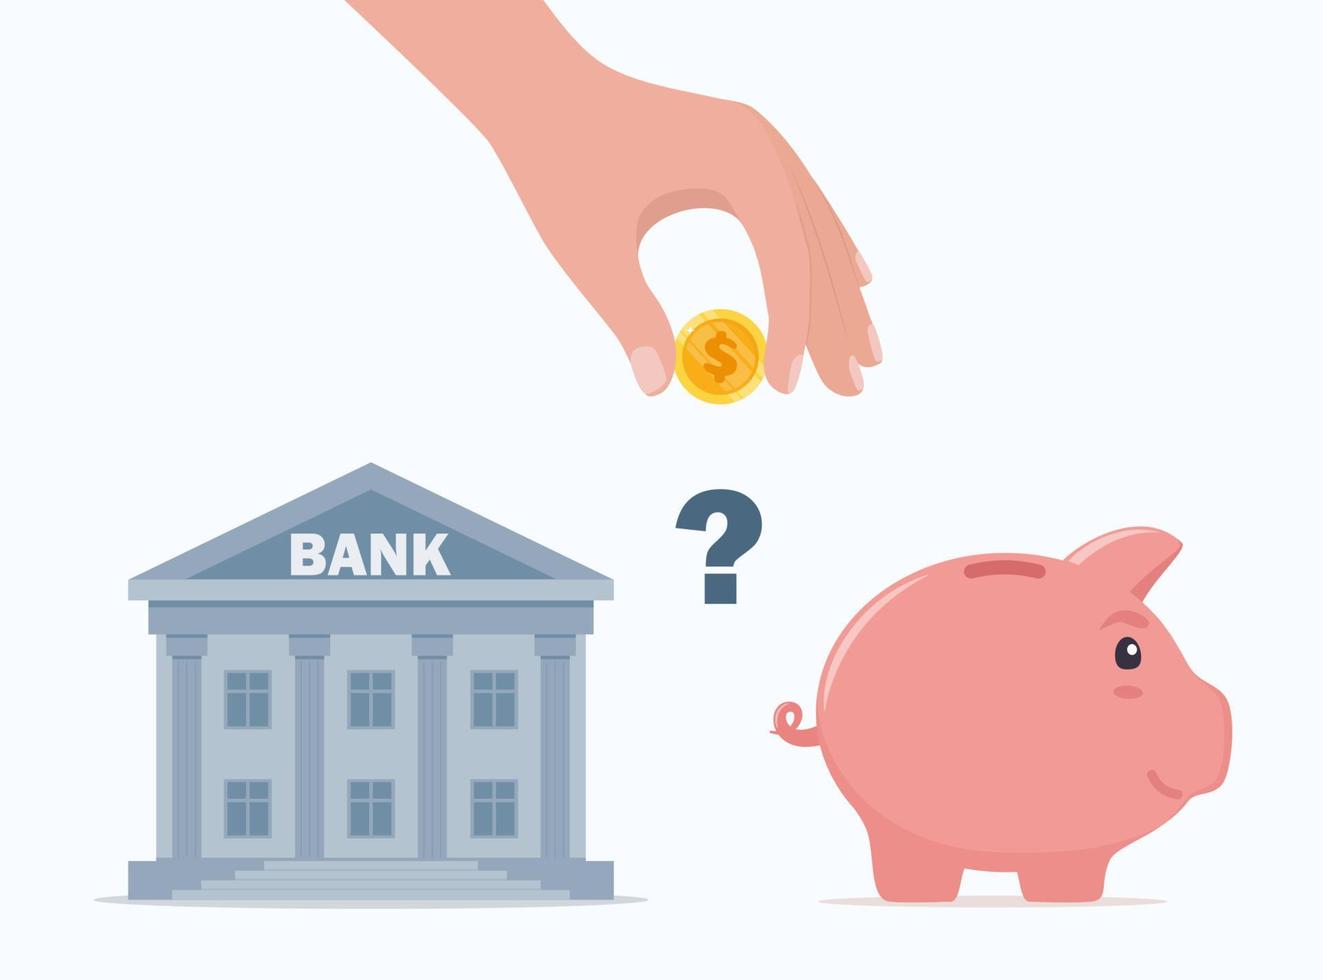 Choosing between bank and piggybank. Budget planning concept. Money savings investment and funding. Bank loan and economy choice. Financial literacy. Vector illustration.